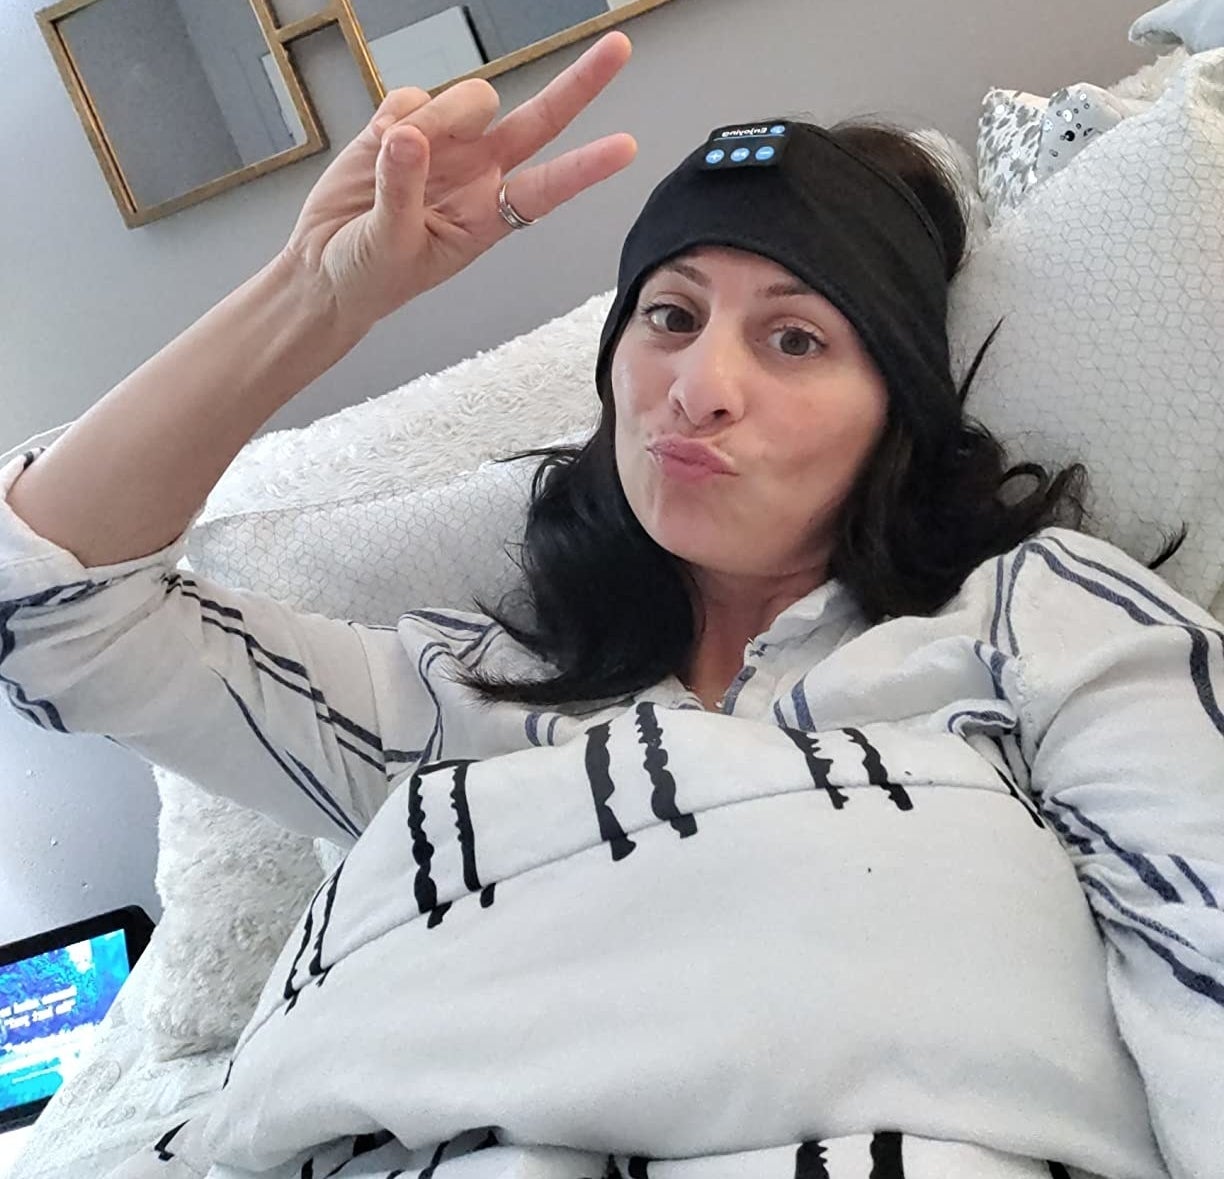 Reviewer in bed with black headband on giving peace sign with right hand